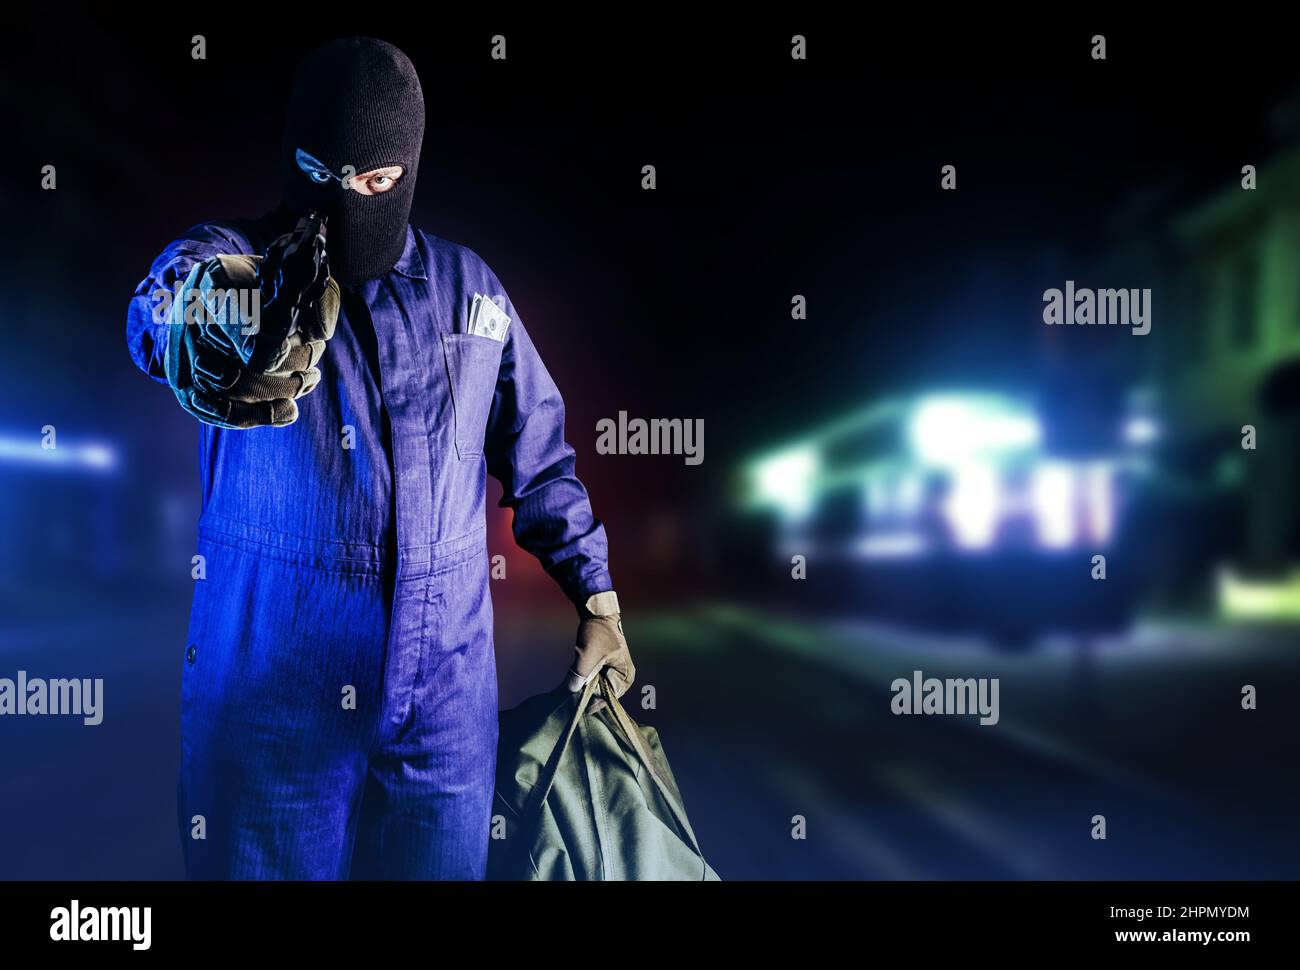 Photo of robber in mask, overalls, gloves, bag and gun standing front view and aiming on night street background. Stock Photo